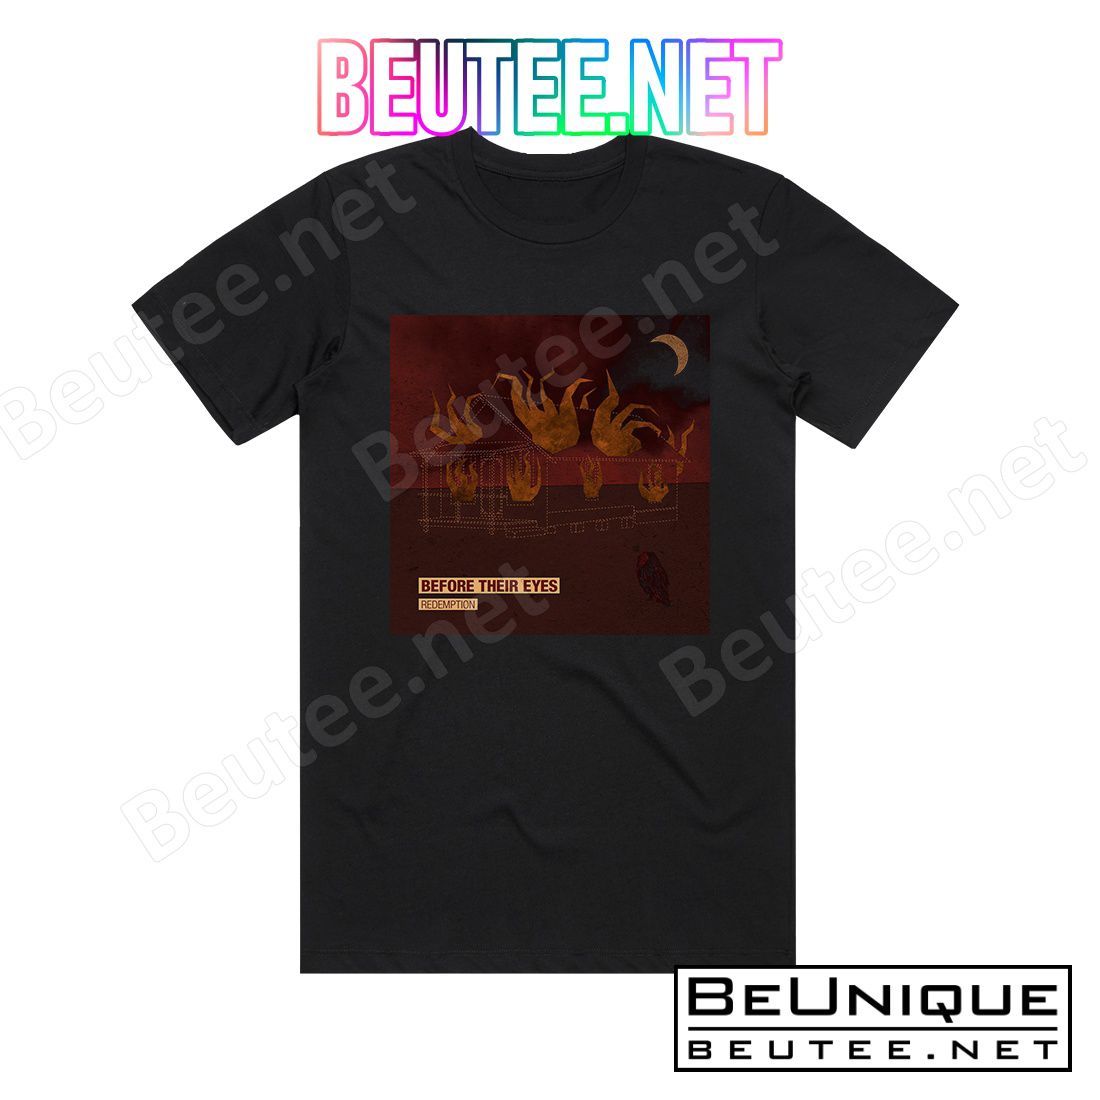 Before Their Eyes Redemption Album Cover T-Shirt